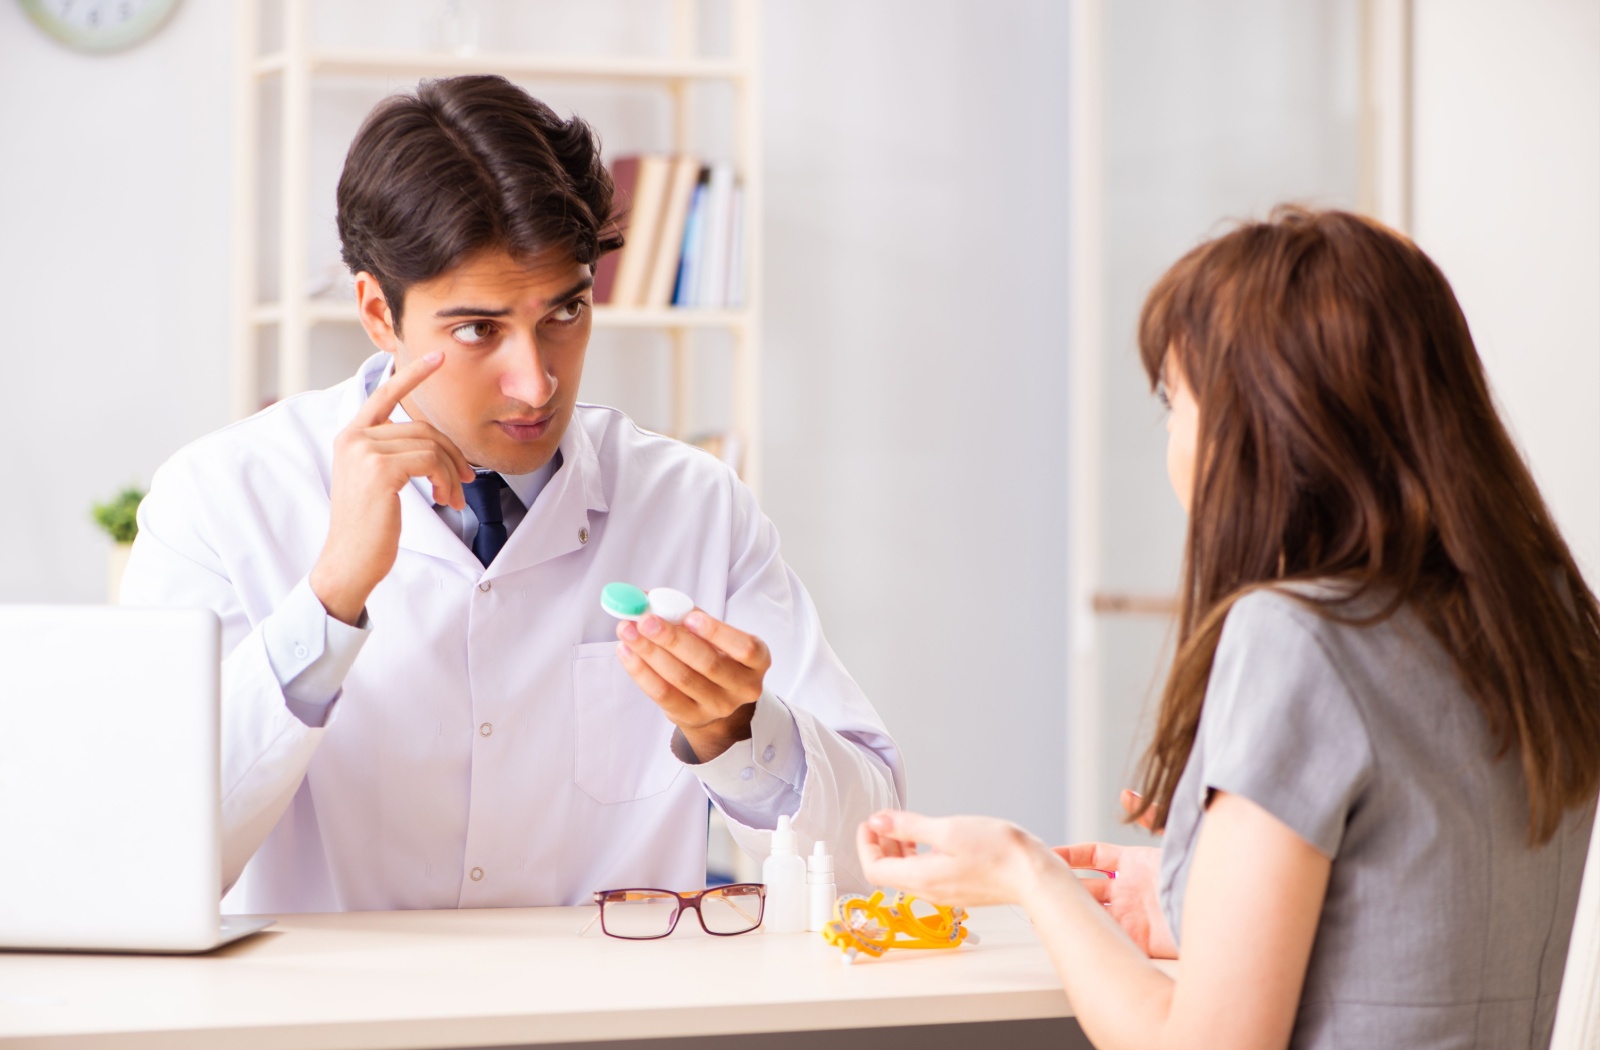 An optometrist explains proper contact lens wear and care to their patient during a contact lens fitting.